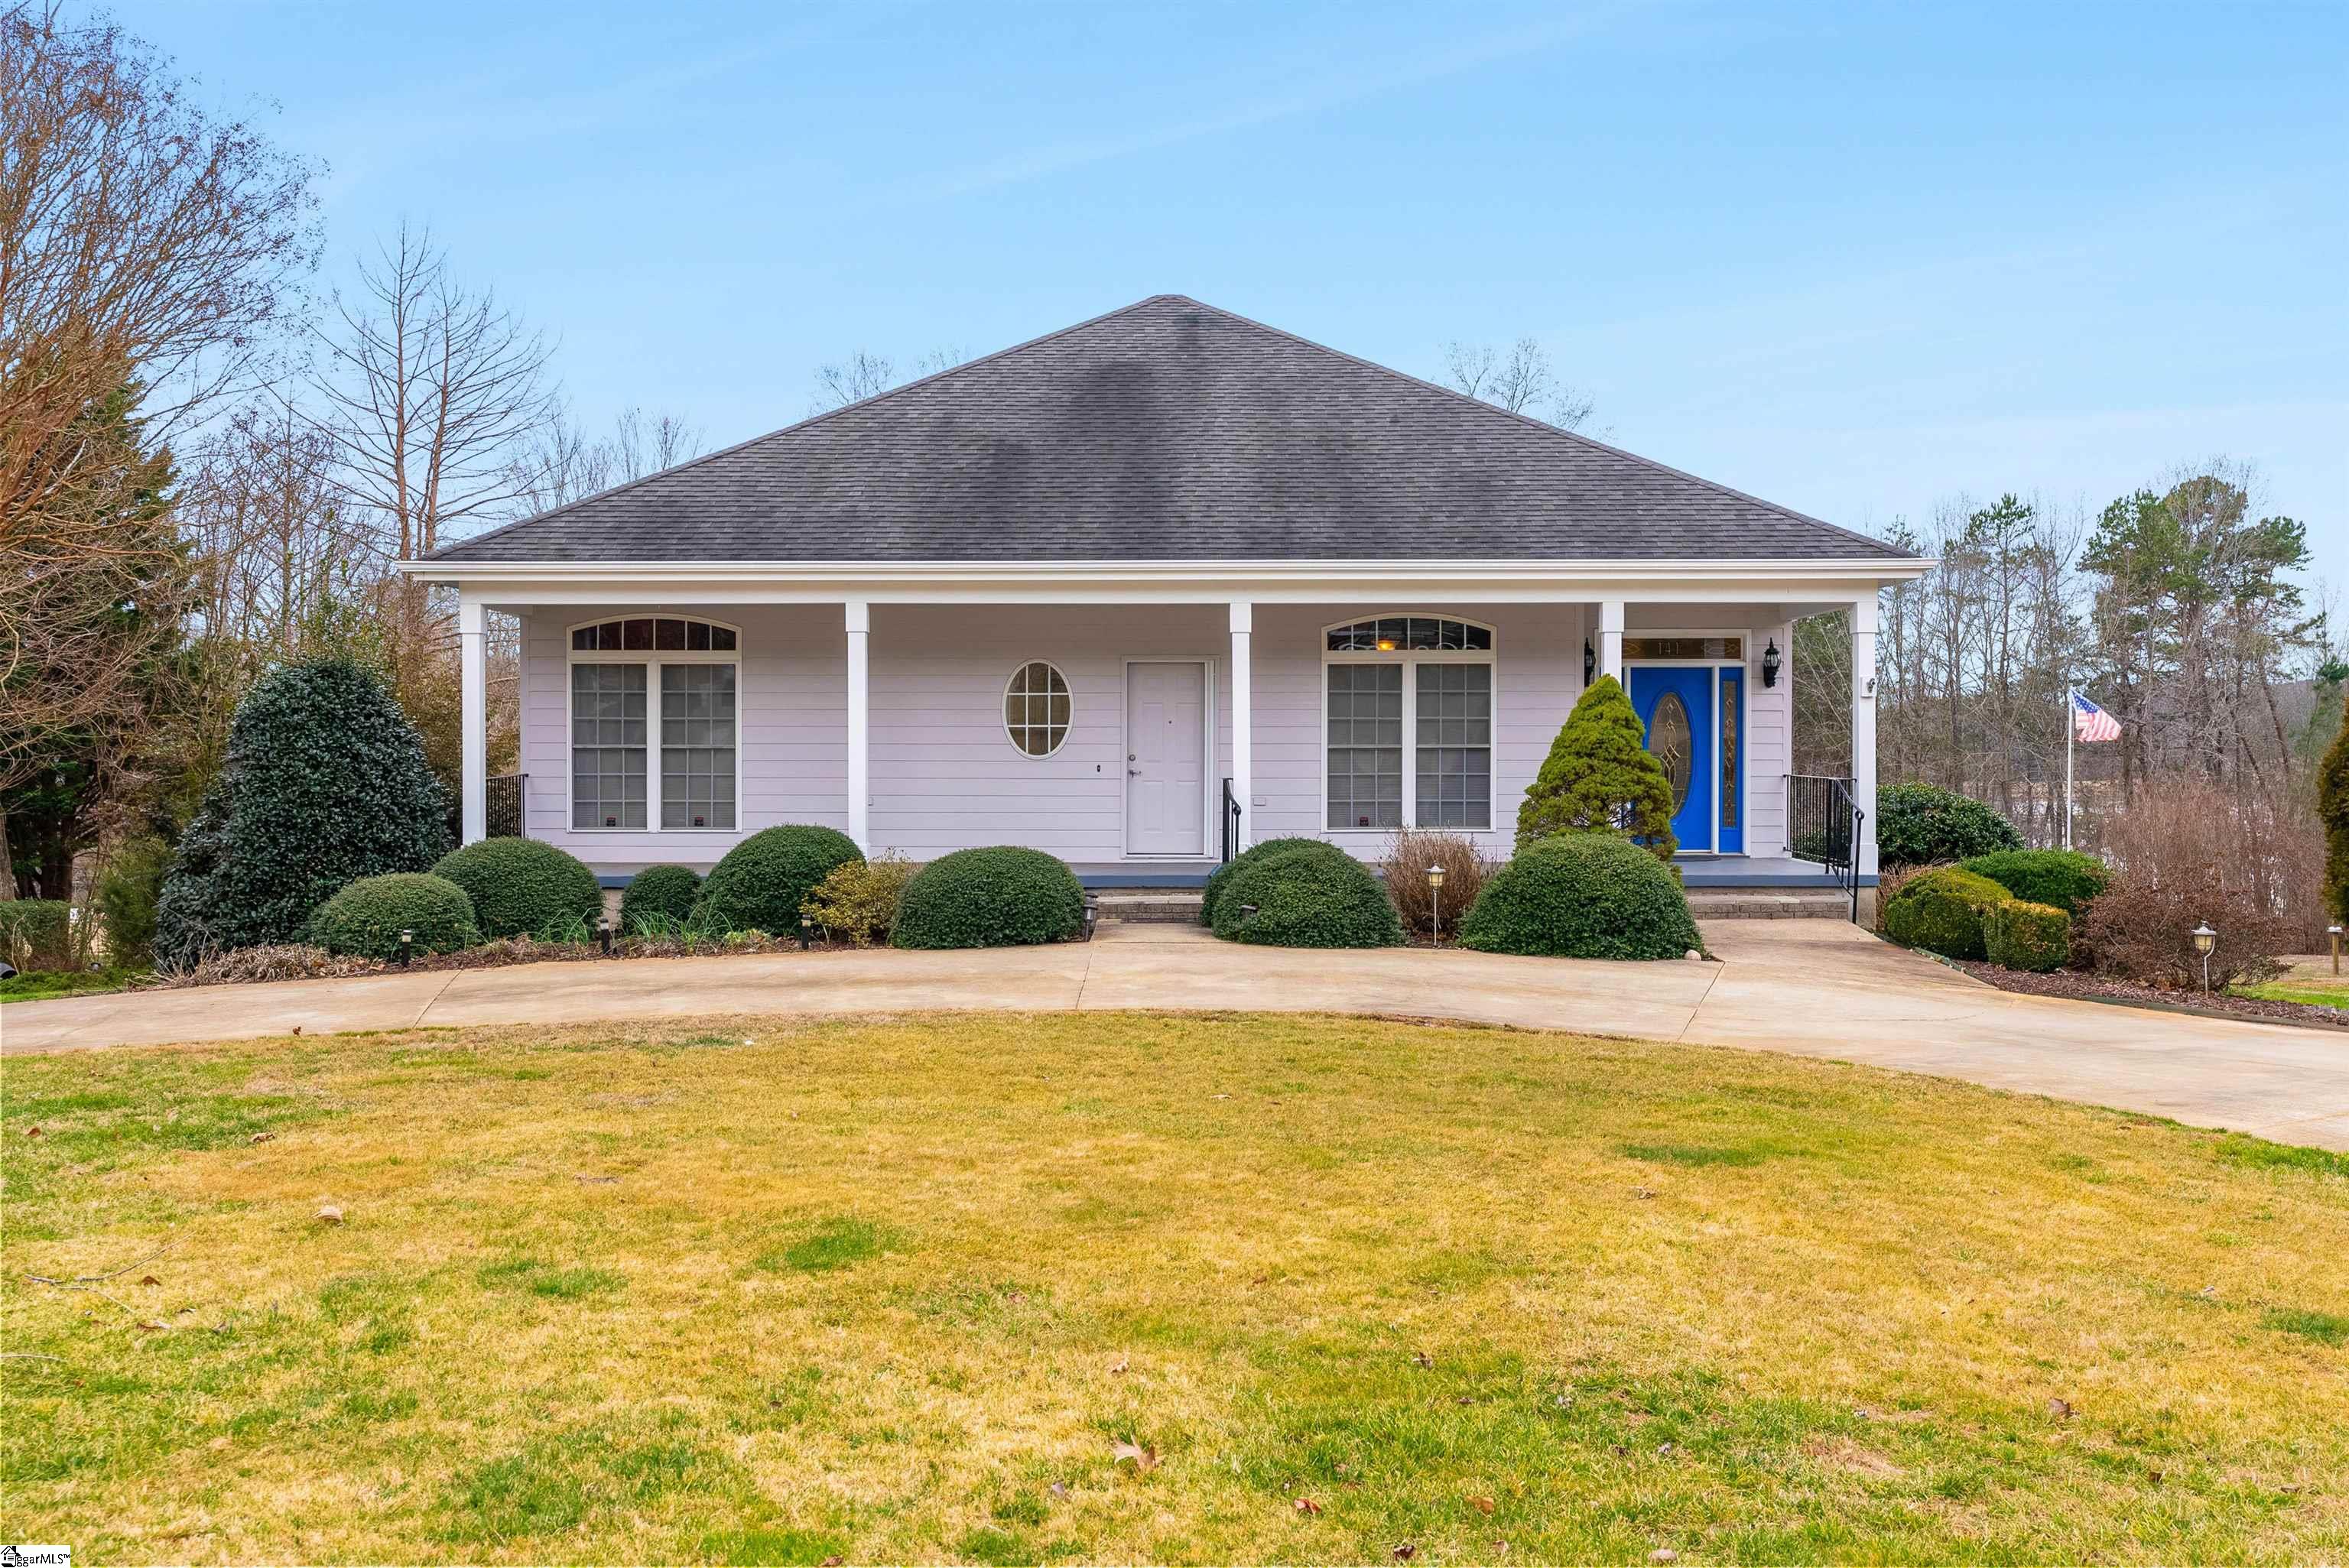 141 Shore Heights Drive Inman, SC 29349